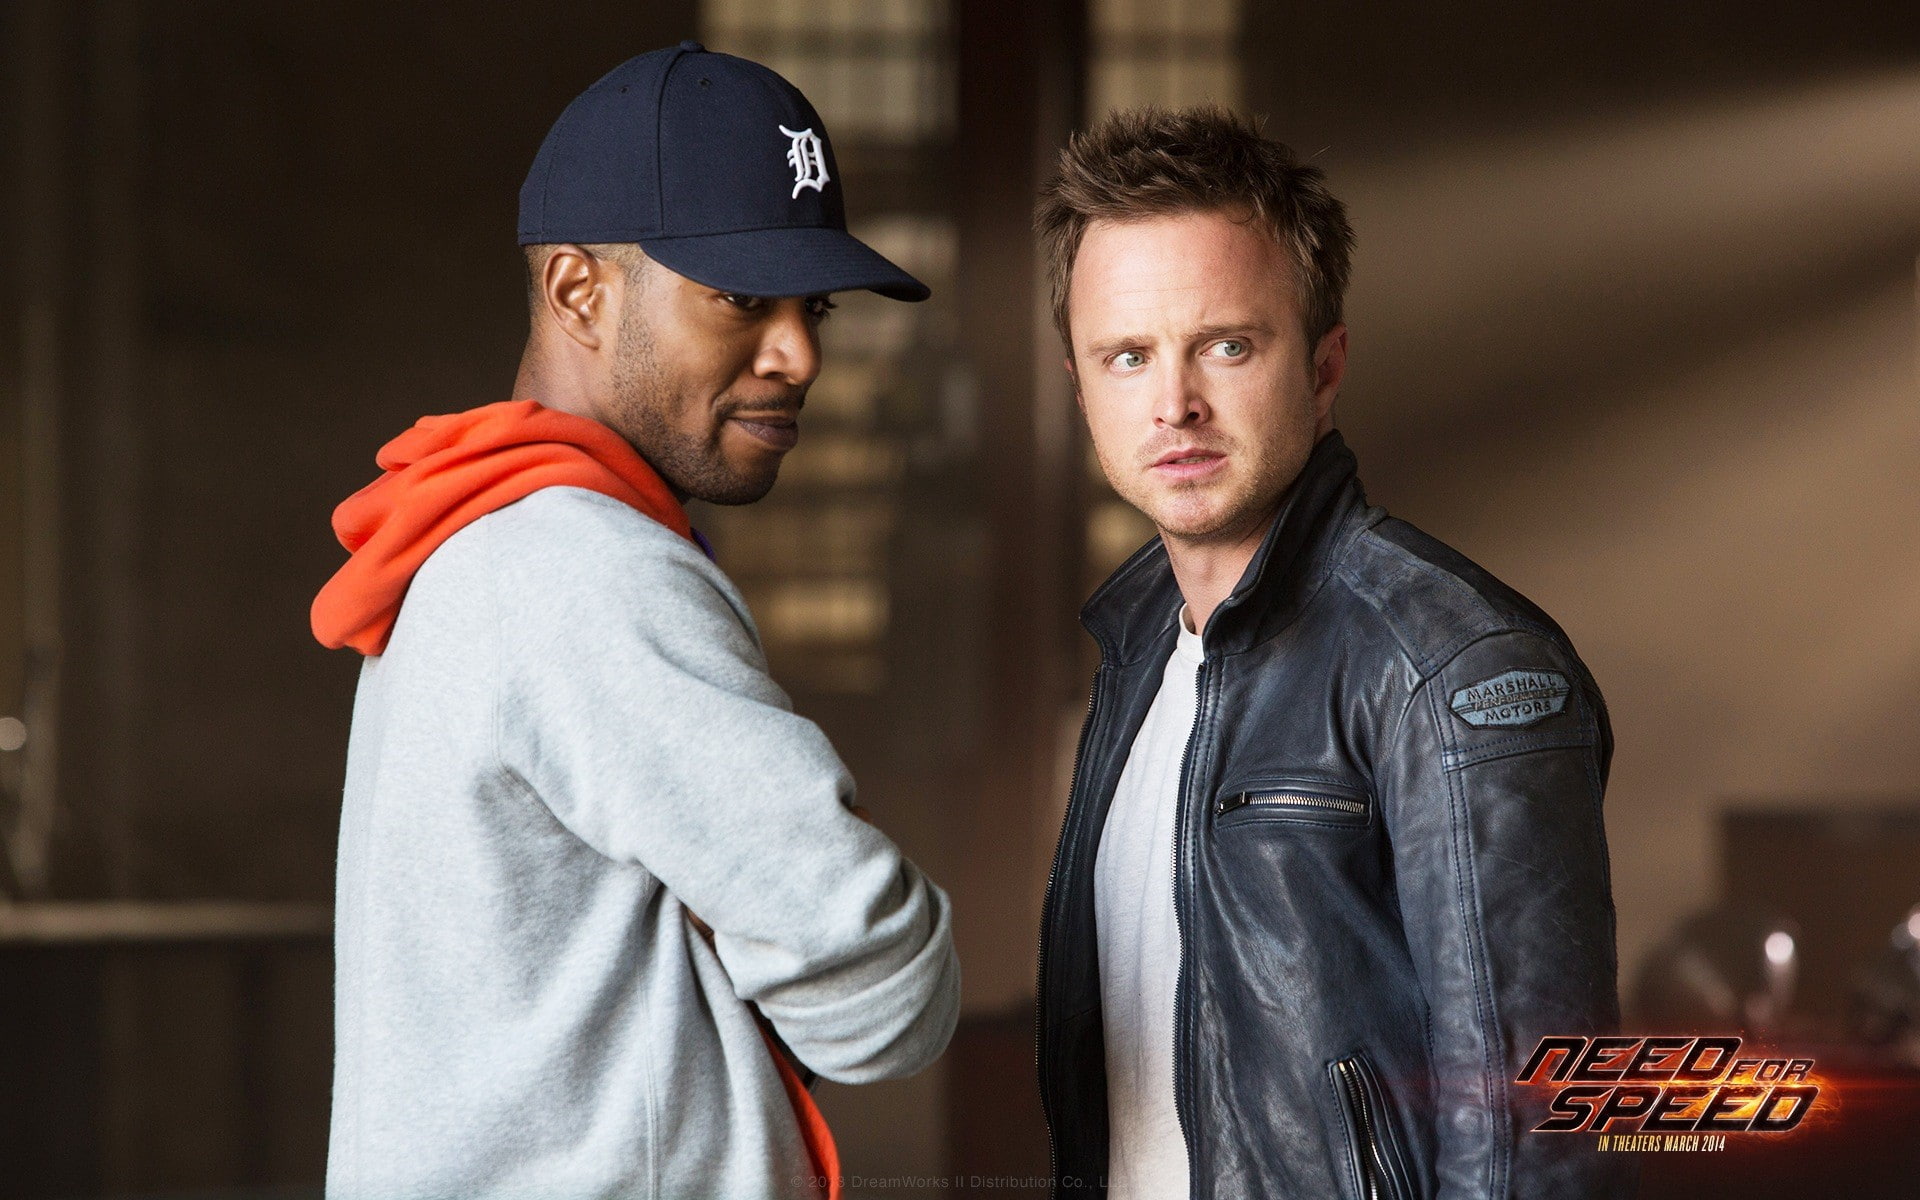 Need for speed, Aaron paul, Tobey marshall, two people, men